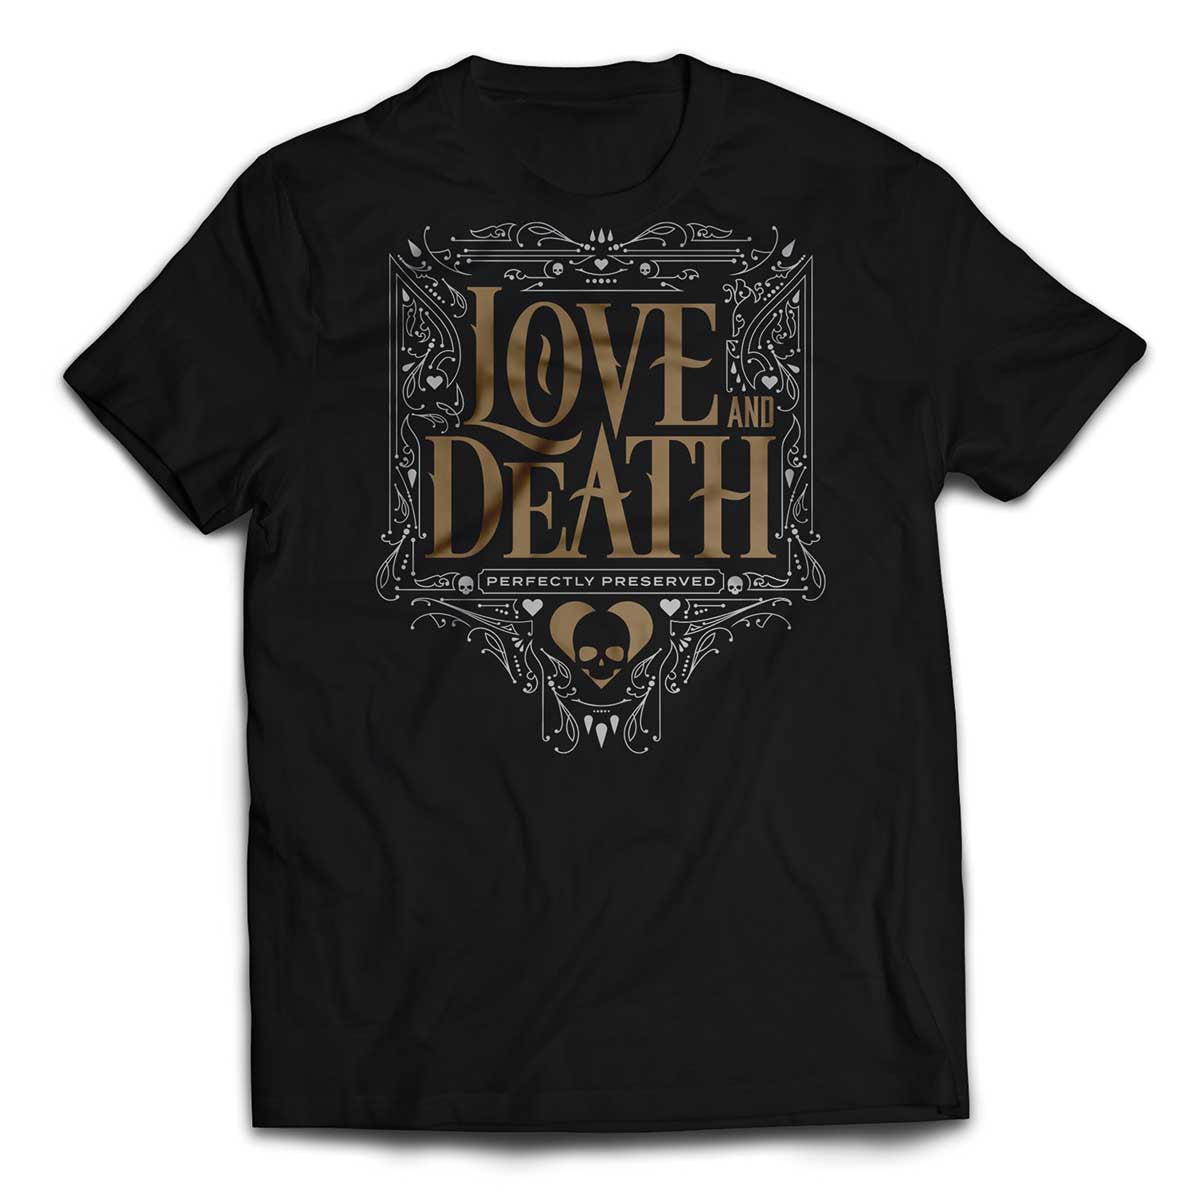 Love And Death "Perfectly Preserved" T shirt